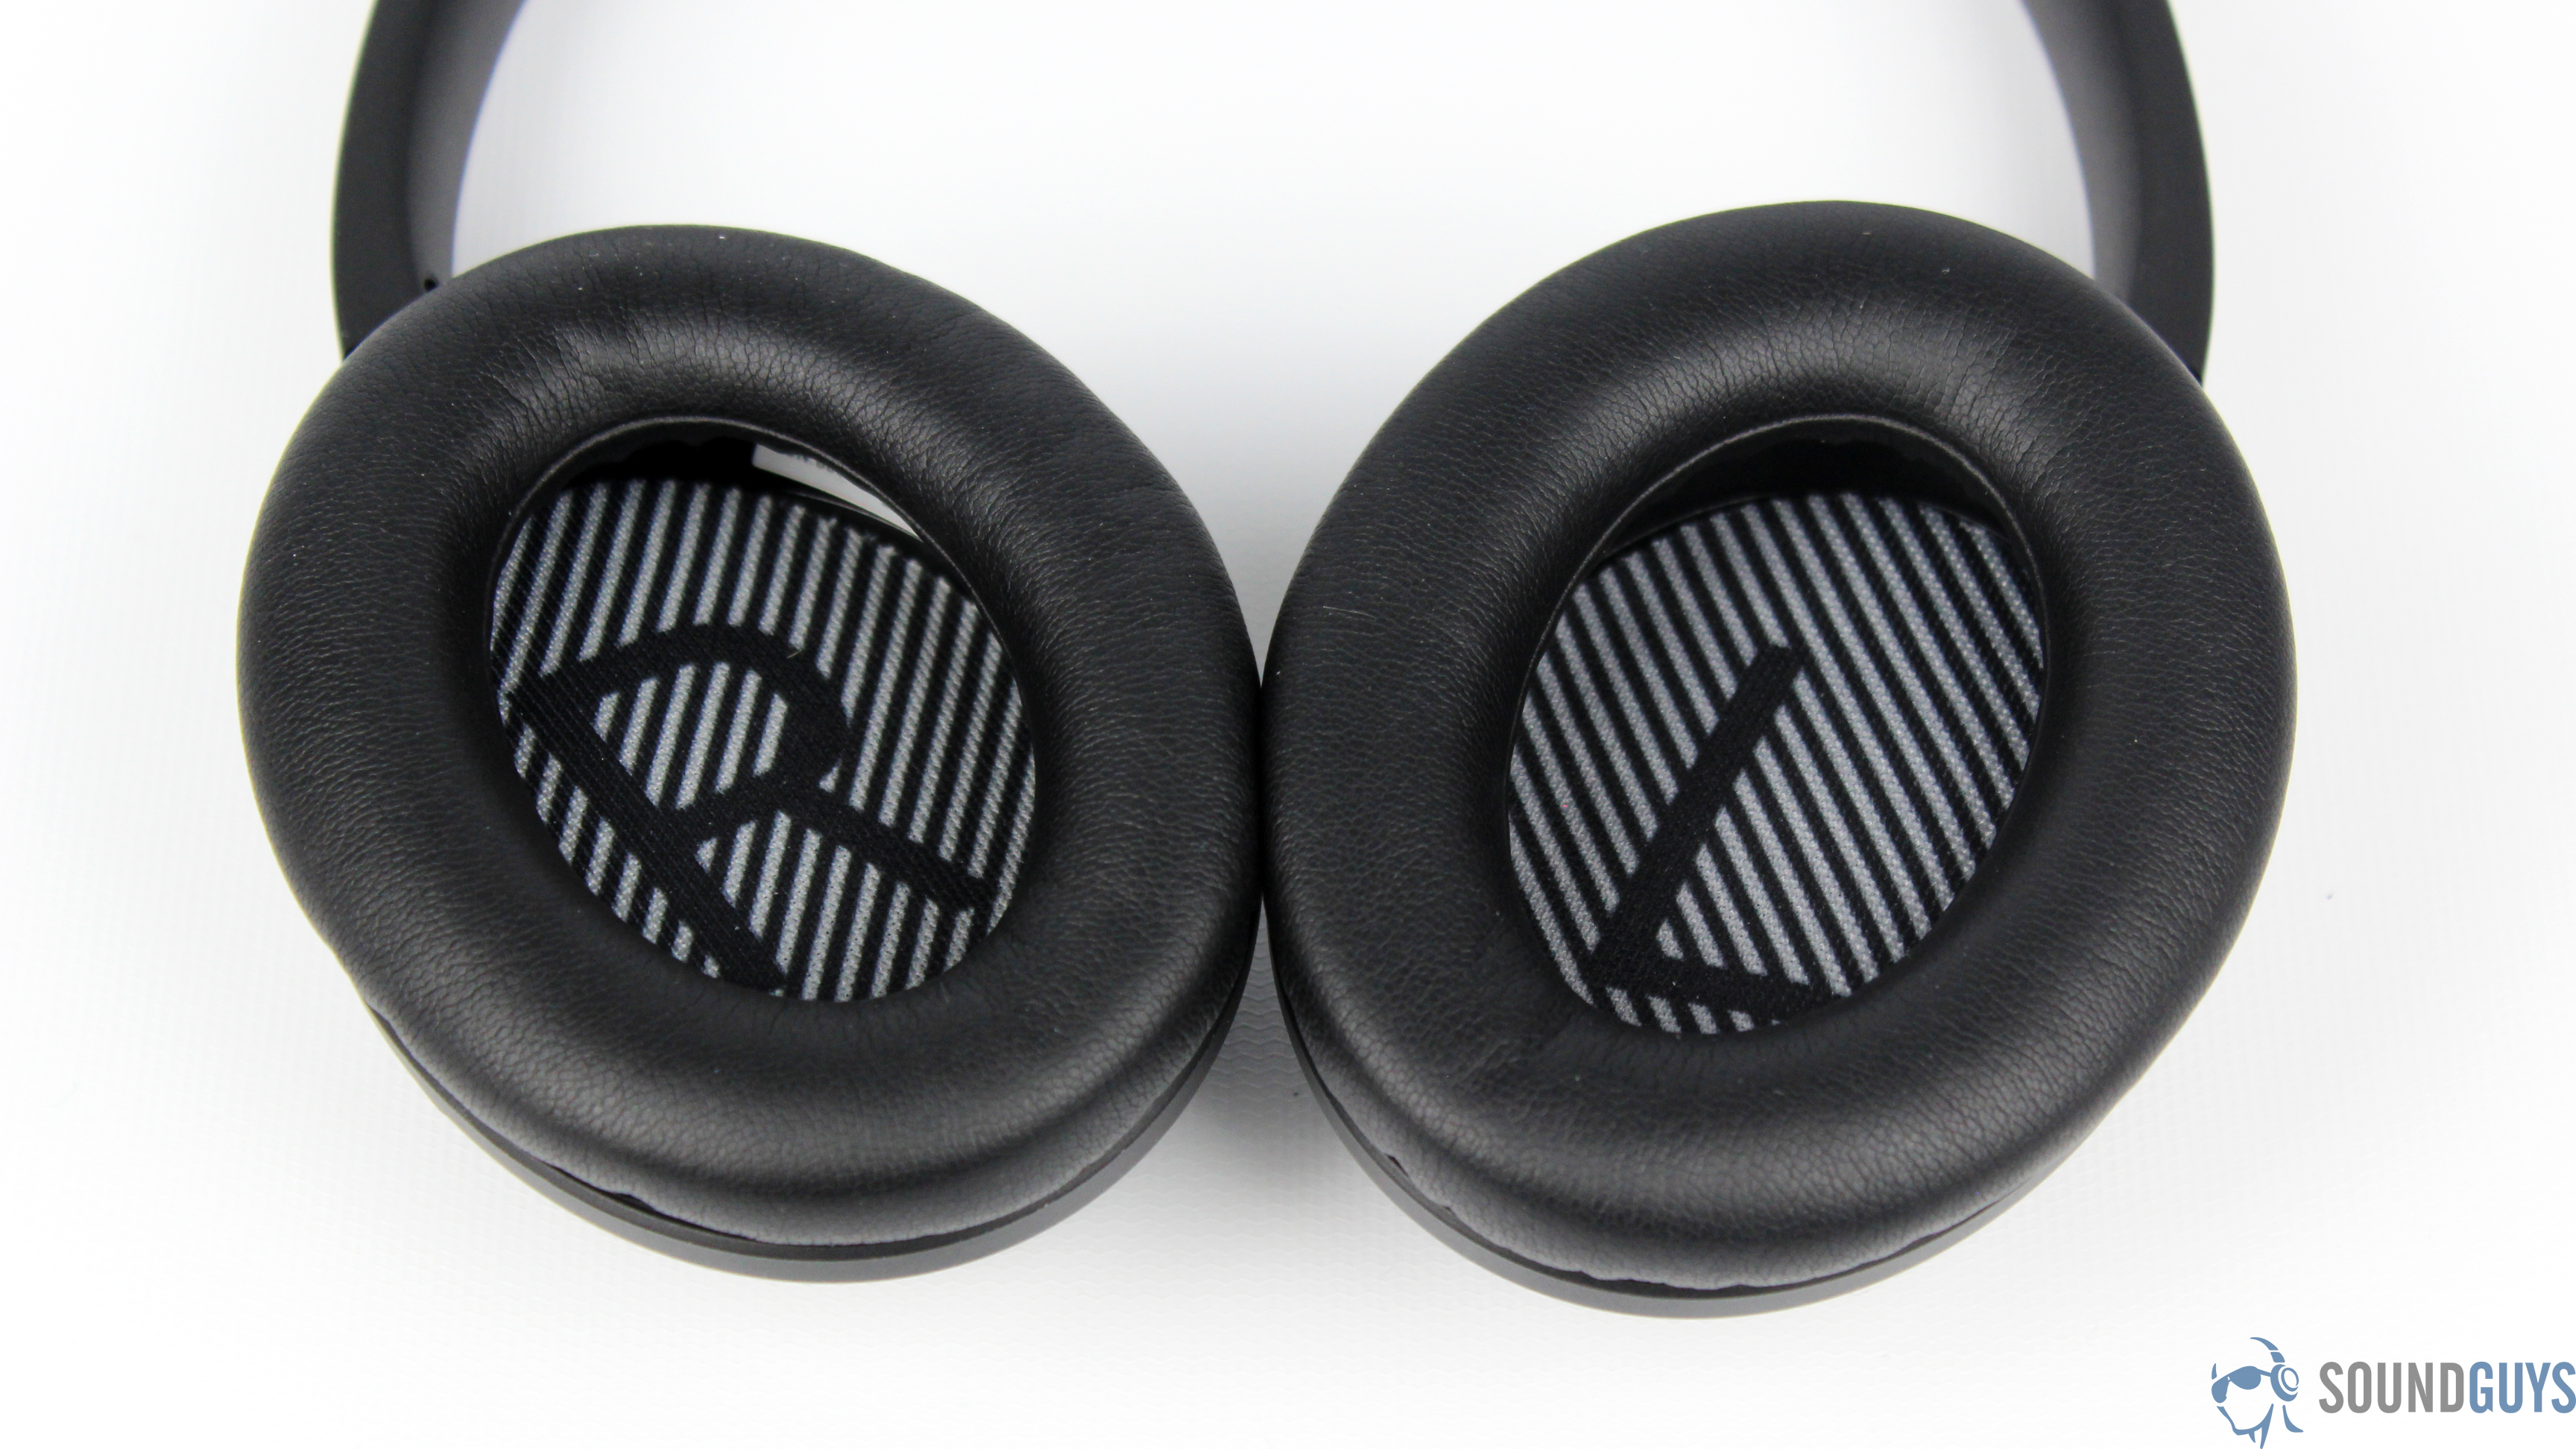 Best headphones under $100: A close up of the ear cups interiori (labeled L/R)